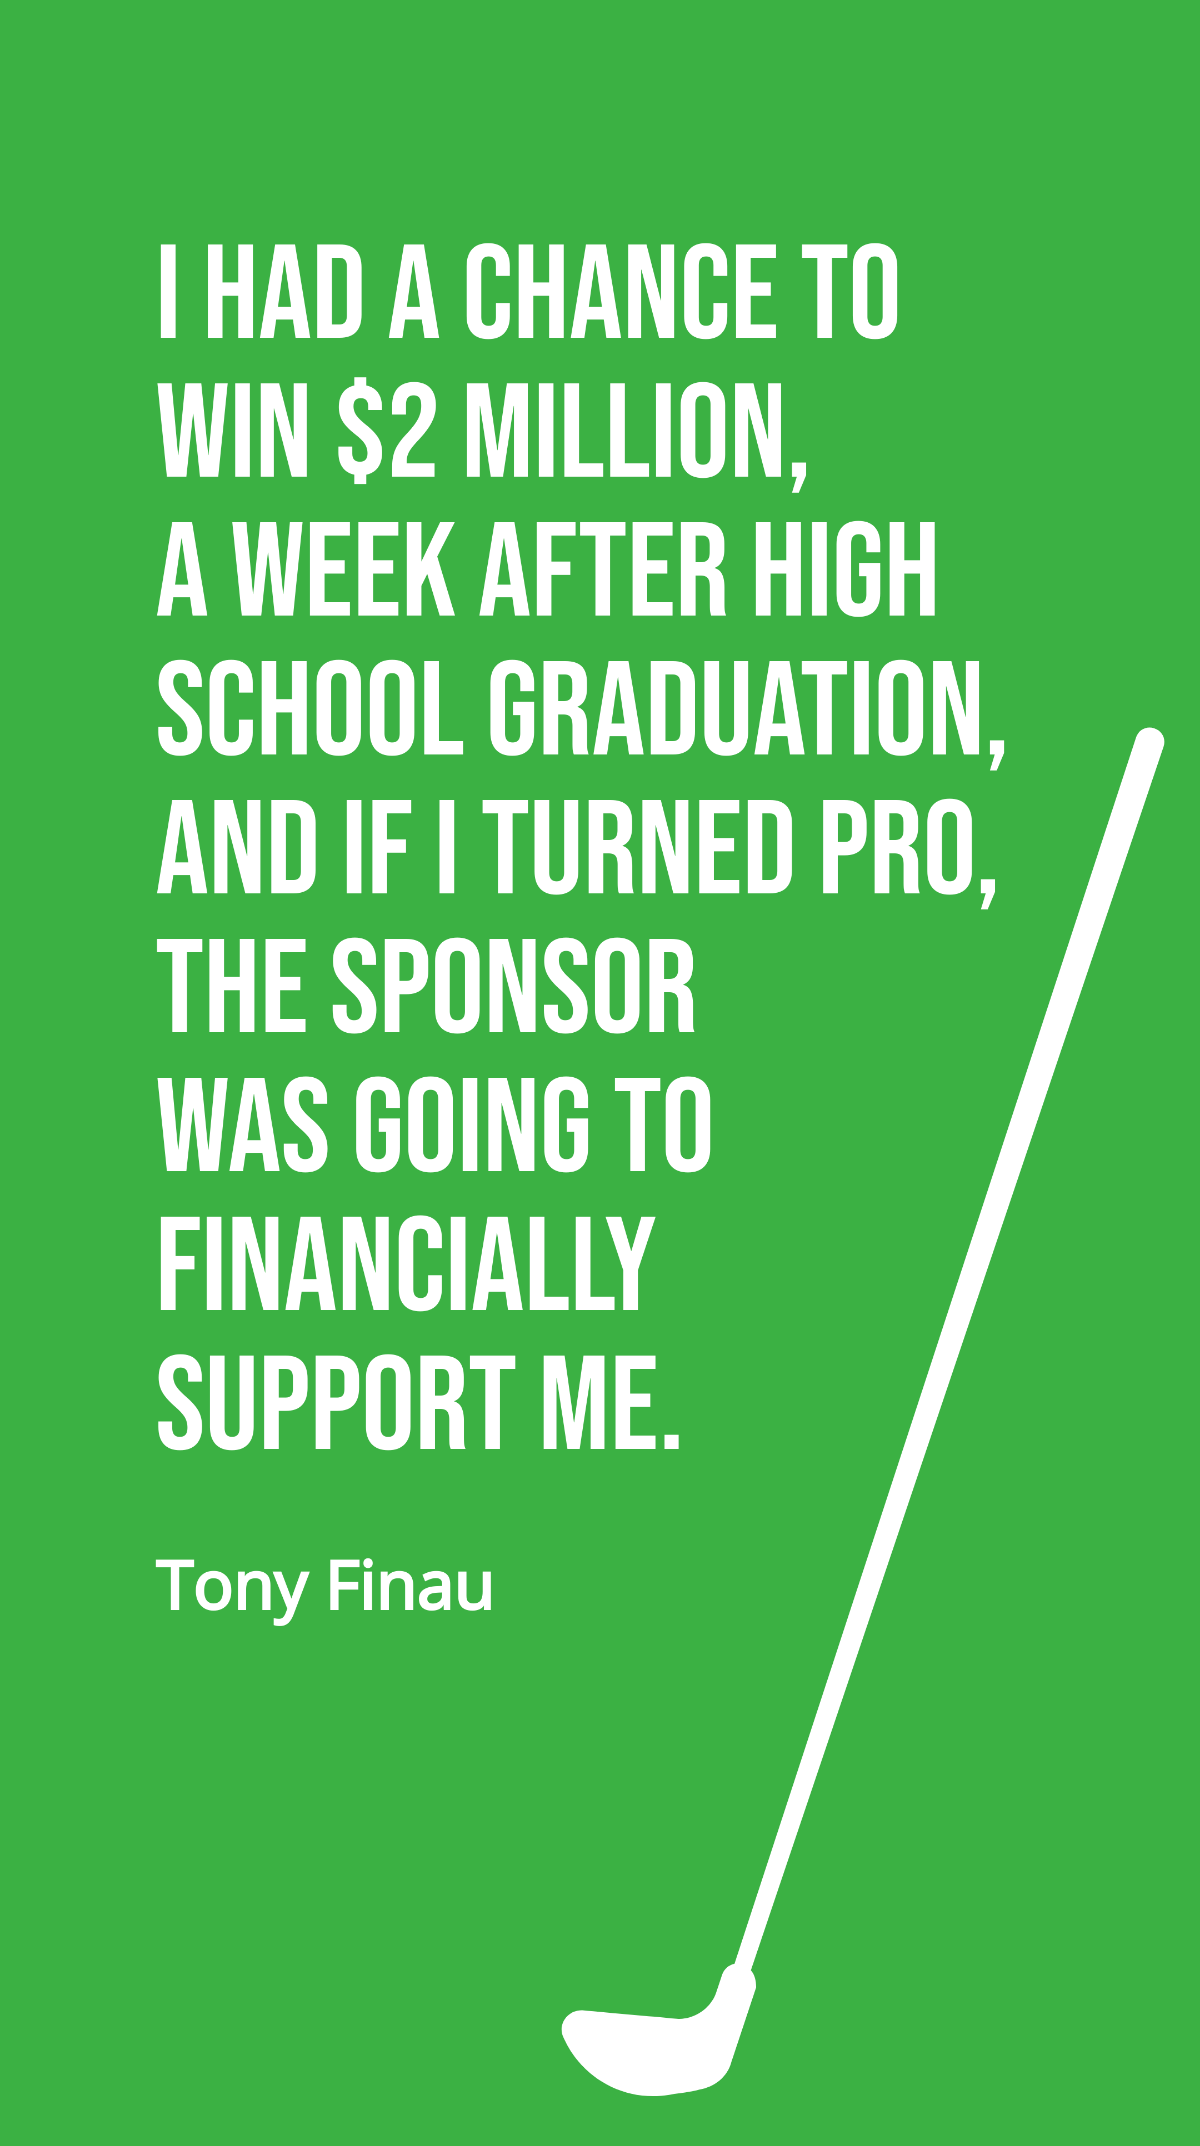 Free Tony Finau - I had a chance to win $2 million, a week after high school graduation, and if I turned pro, the sponsor was going to financially support me. Template